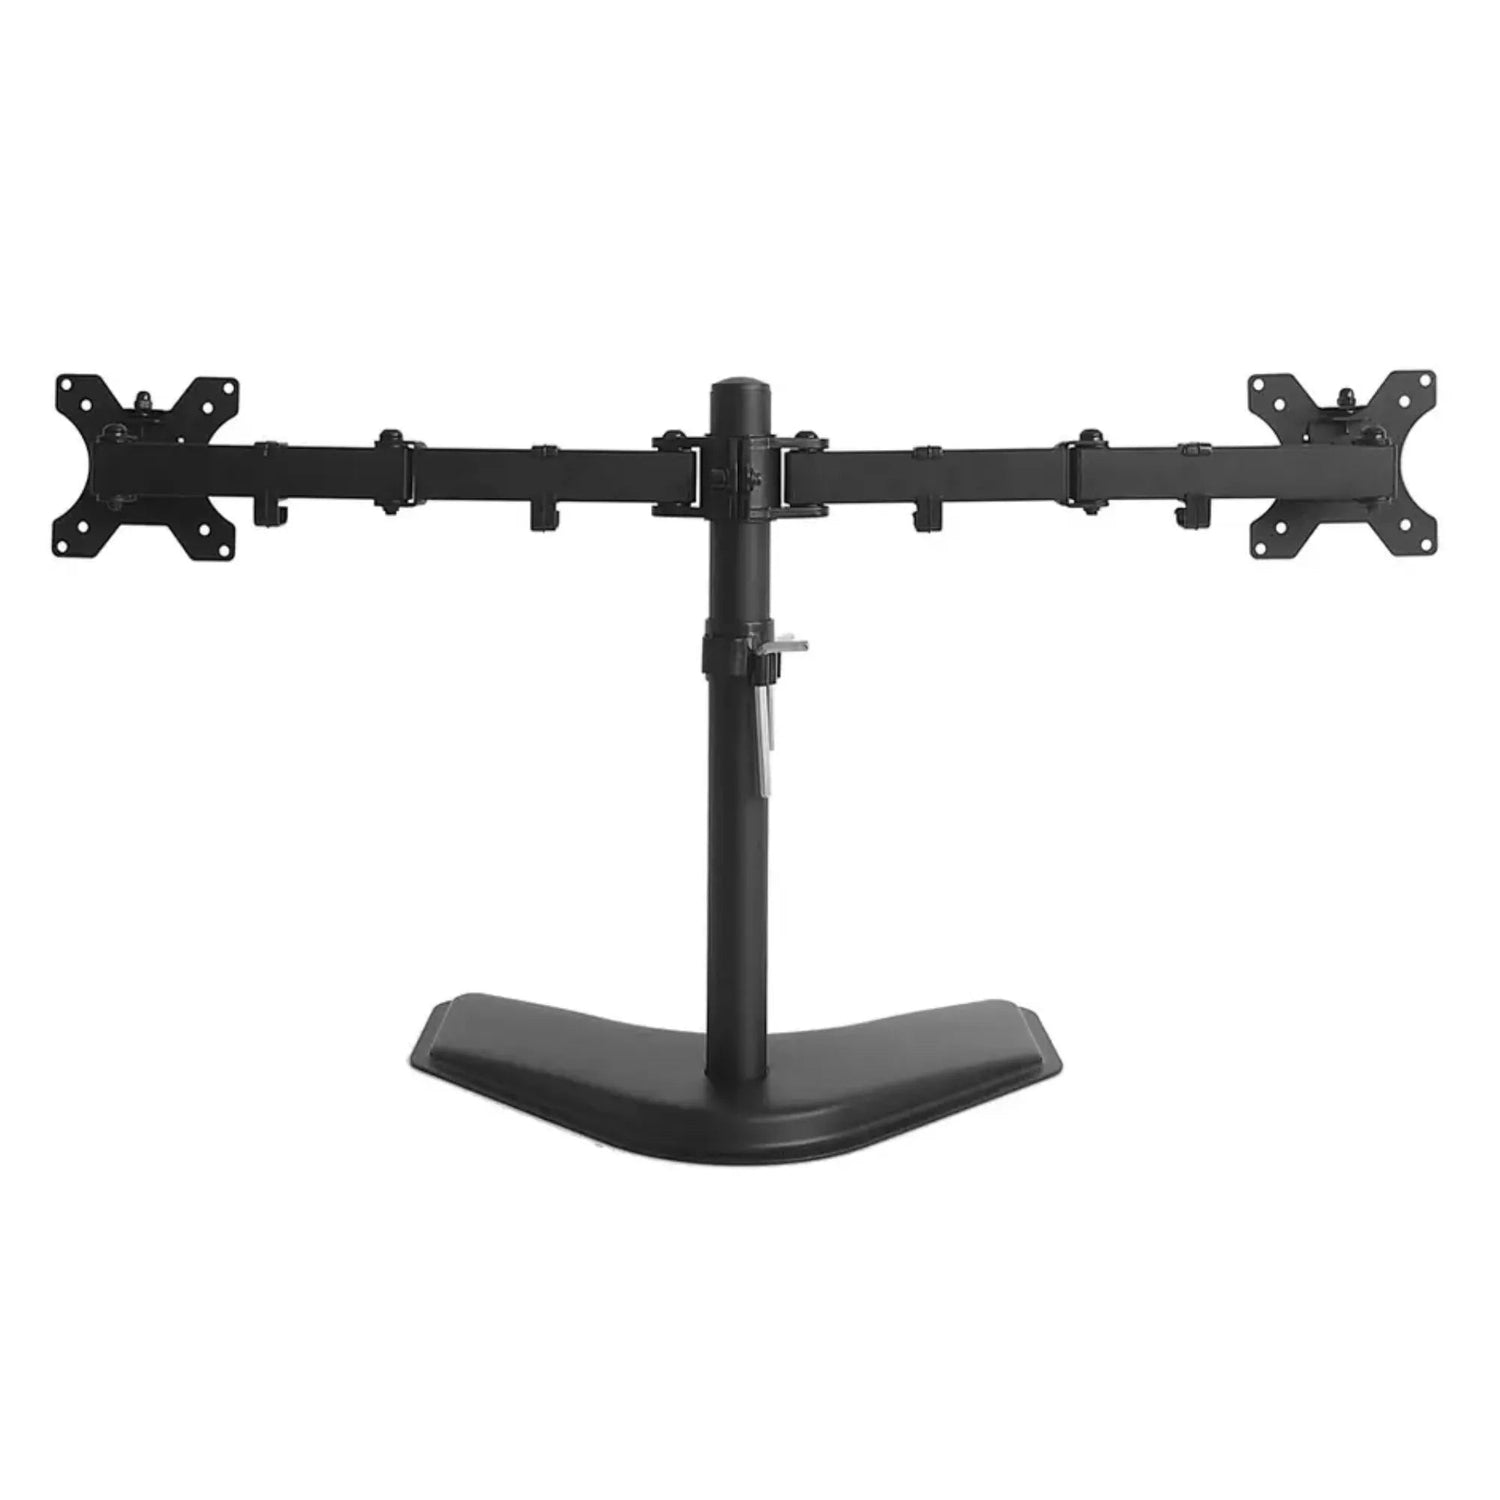 Dual Monitor Desk Stand 13 to 27" Swivel & tilt Table Top Stand - GADGET WAGON Monitor Arm